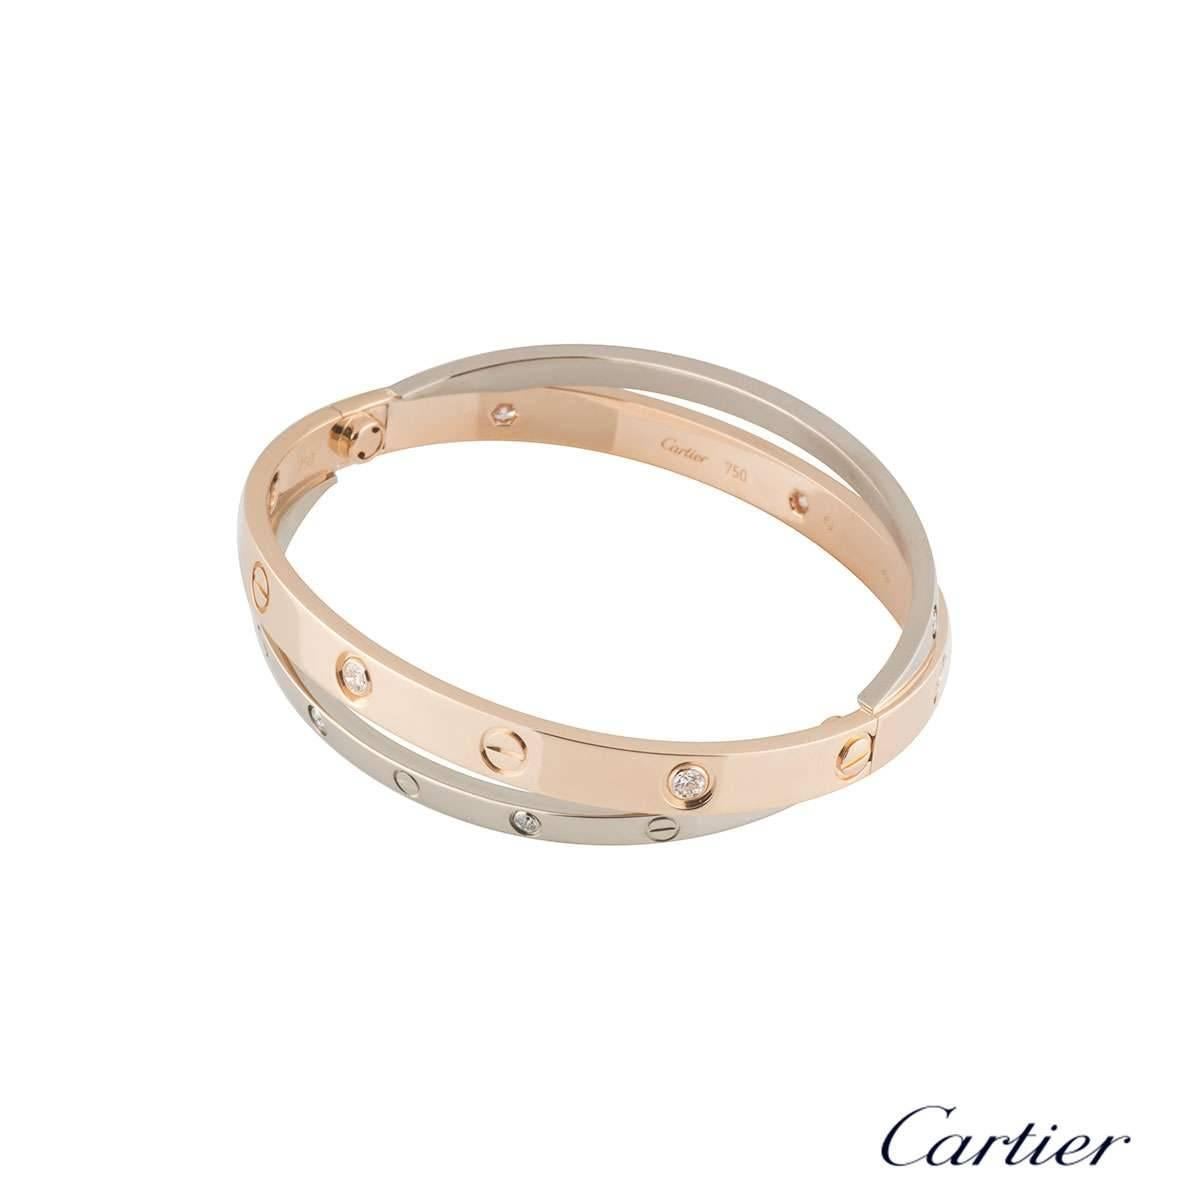 A double Cartier 18k rose and white gold Love bangle. The predominant 18k rose gold bangle is set with 6 round brilliant cut diamonds and alternating screw motifs. Interlinking is an 18k white gold band on either side also displaying the alternating